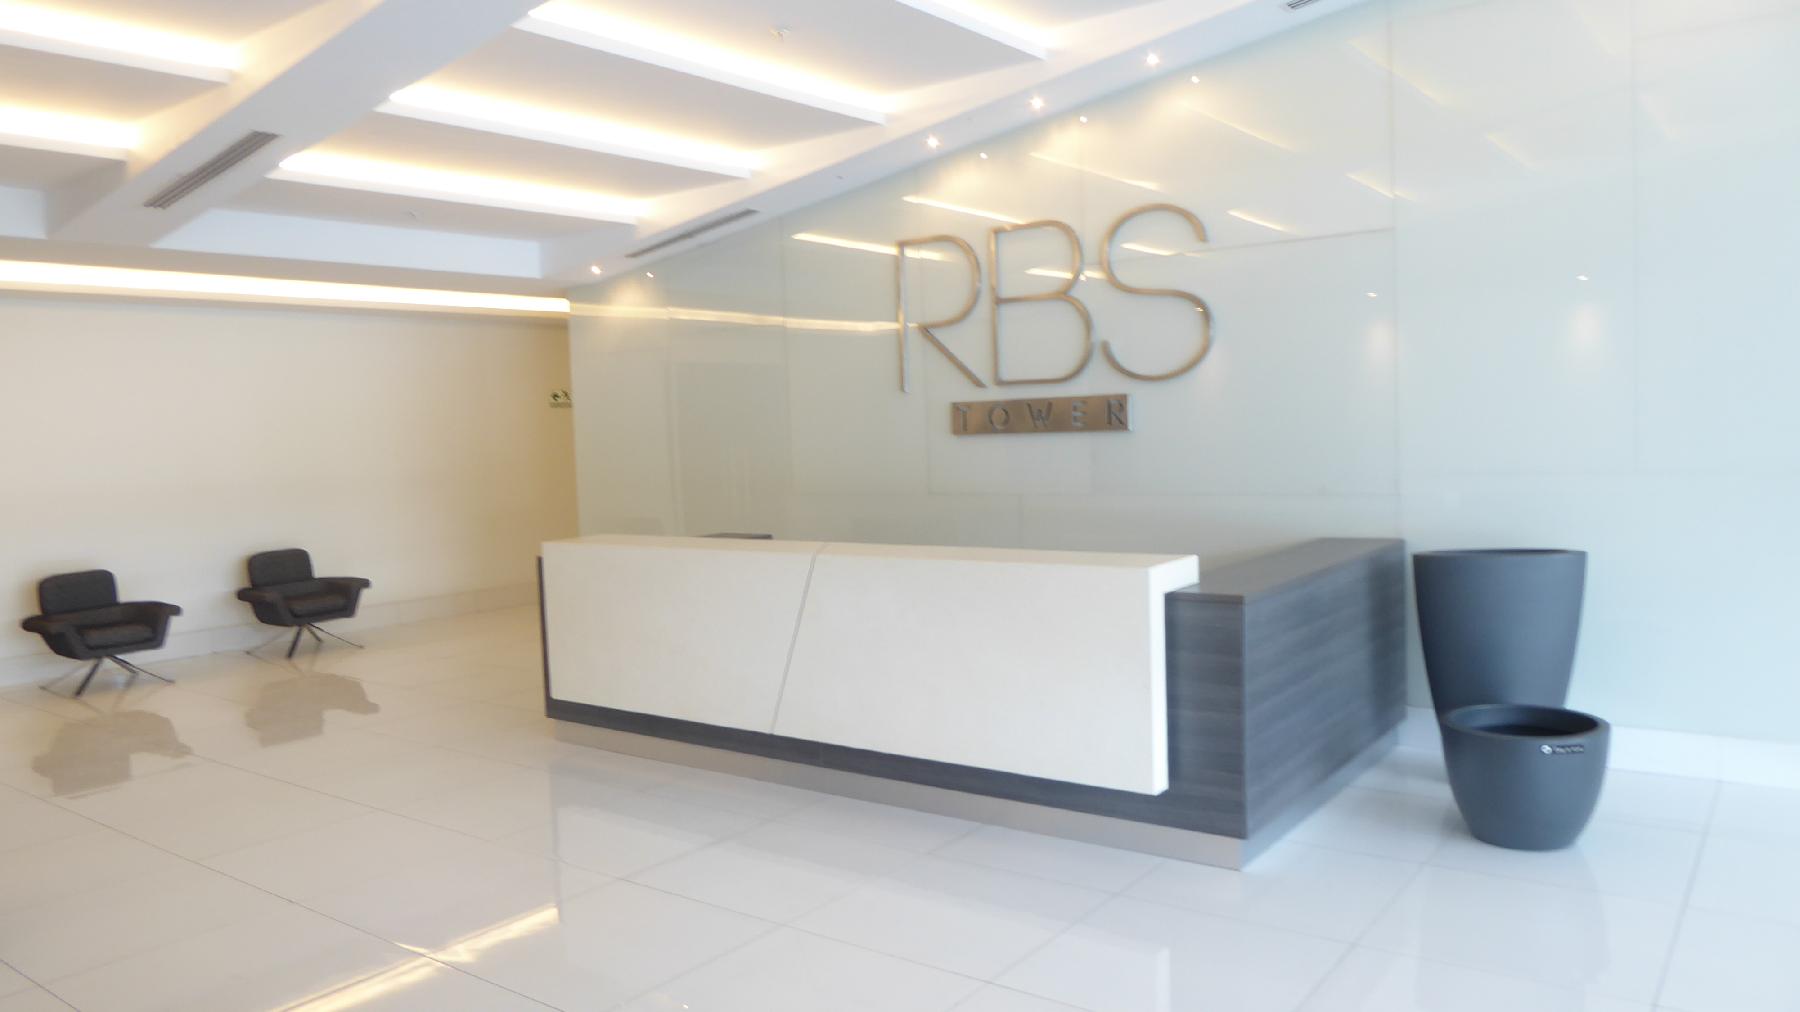 PANAMA RBS TOWER OFFICE FOR SALE 1200